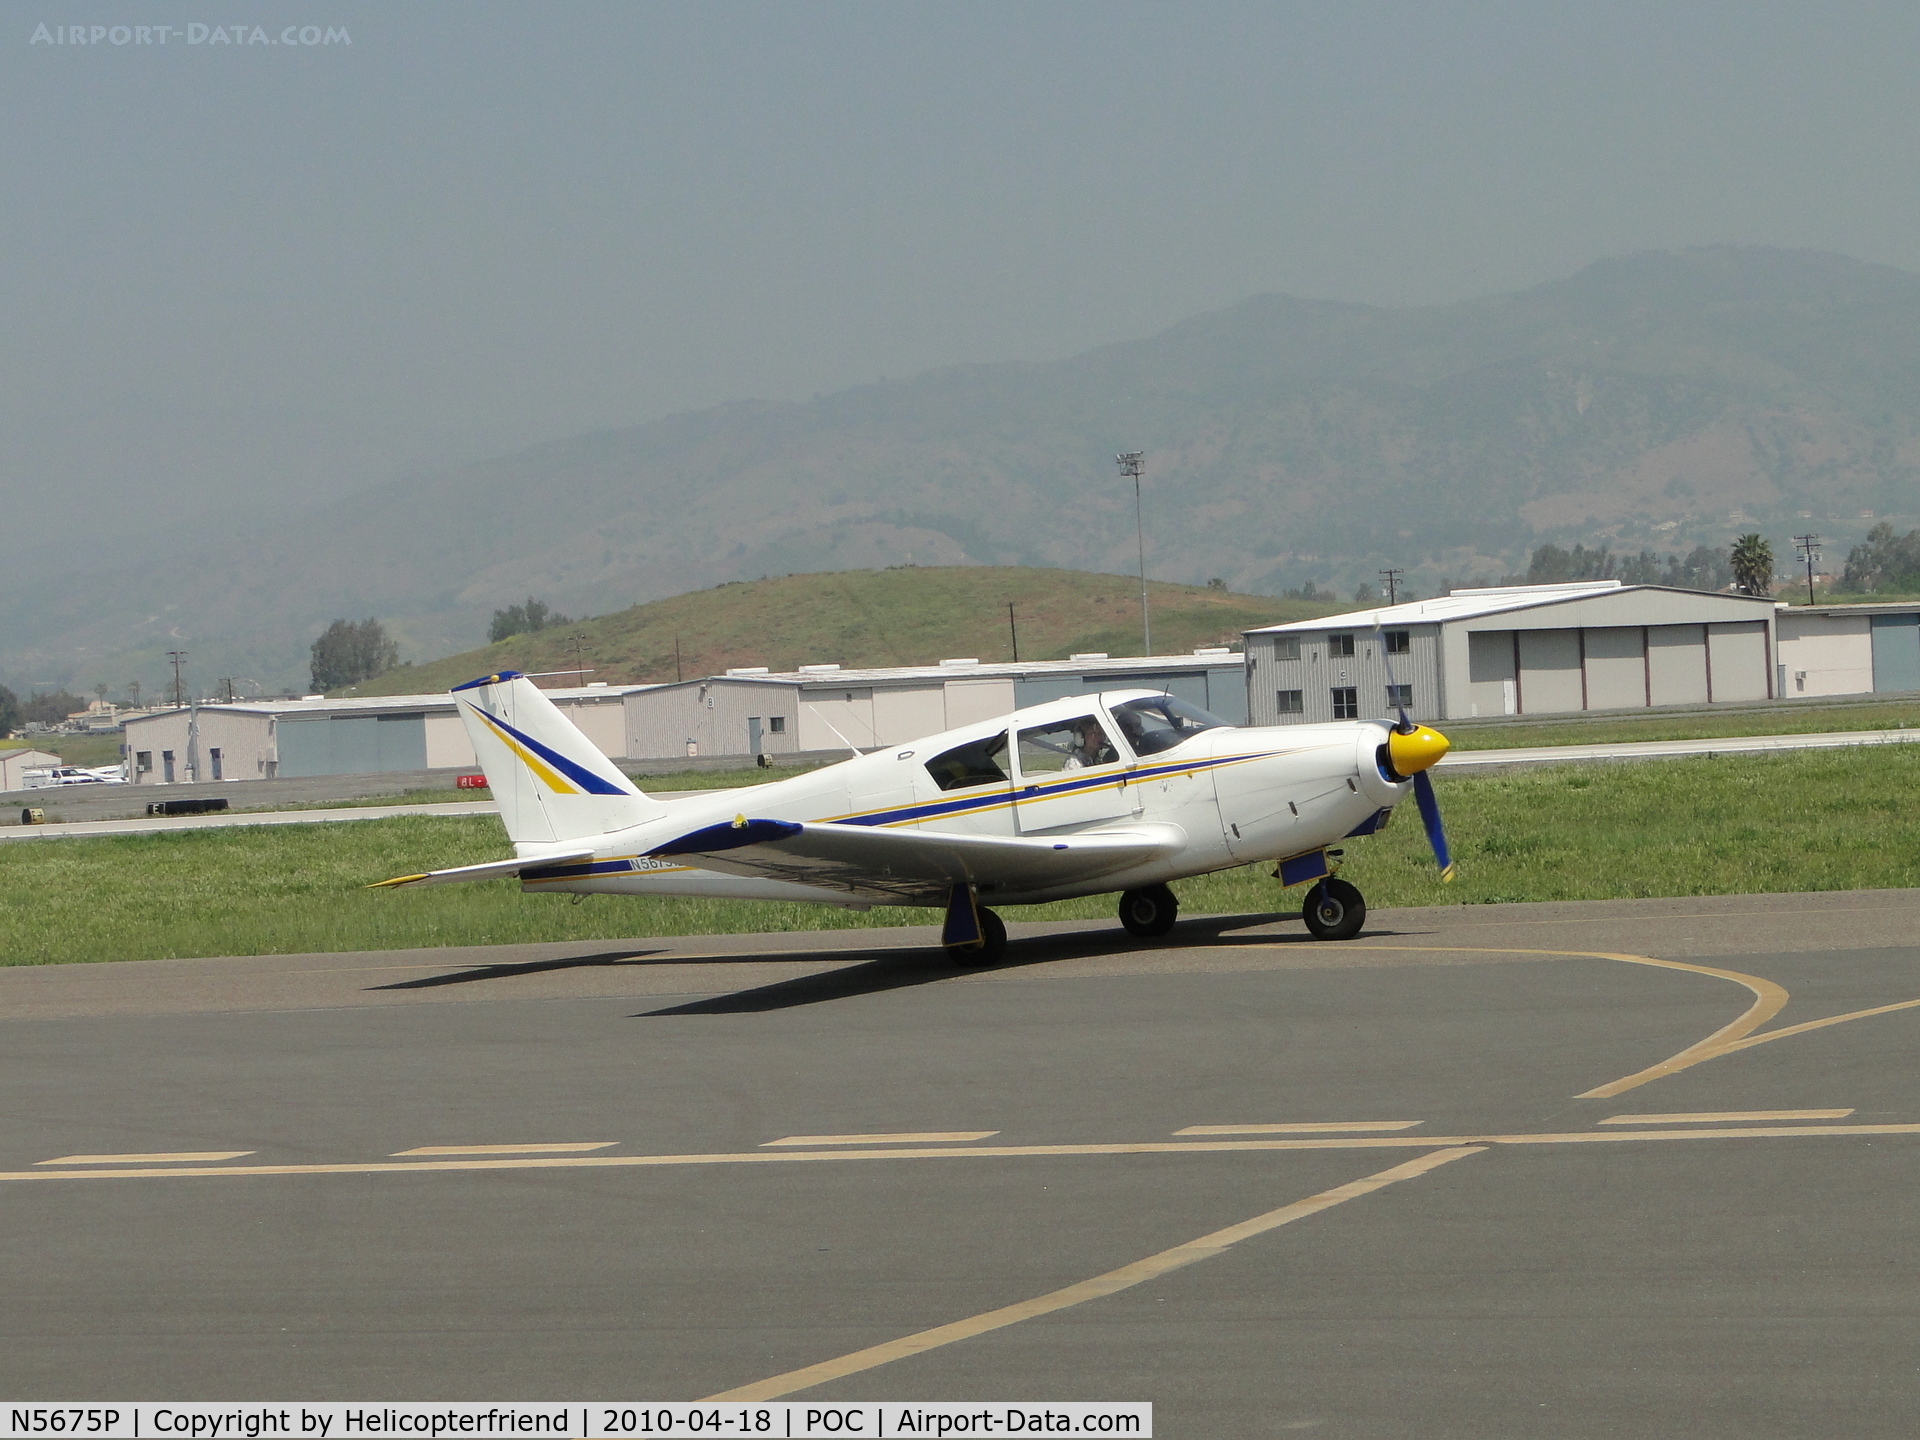 N5675P, 1959 Piper PA-24-250 Comanche C/N 24-747, Taxiing to transient parking